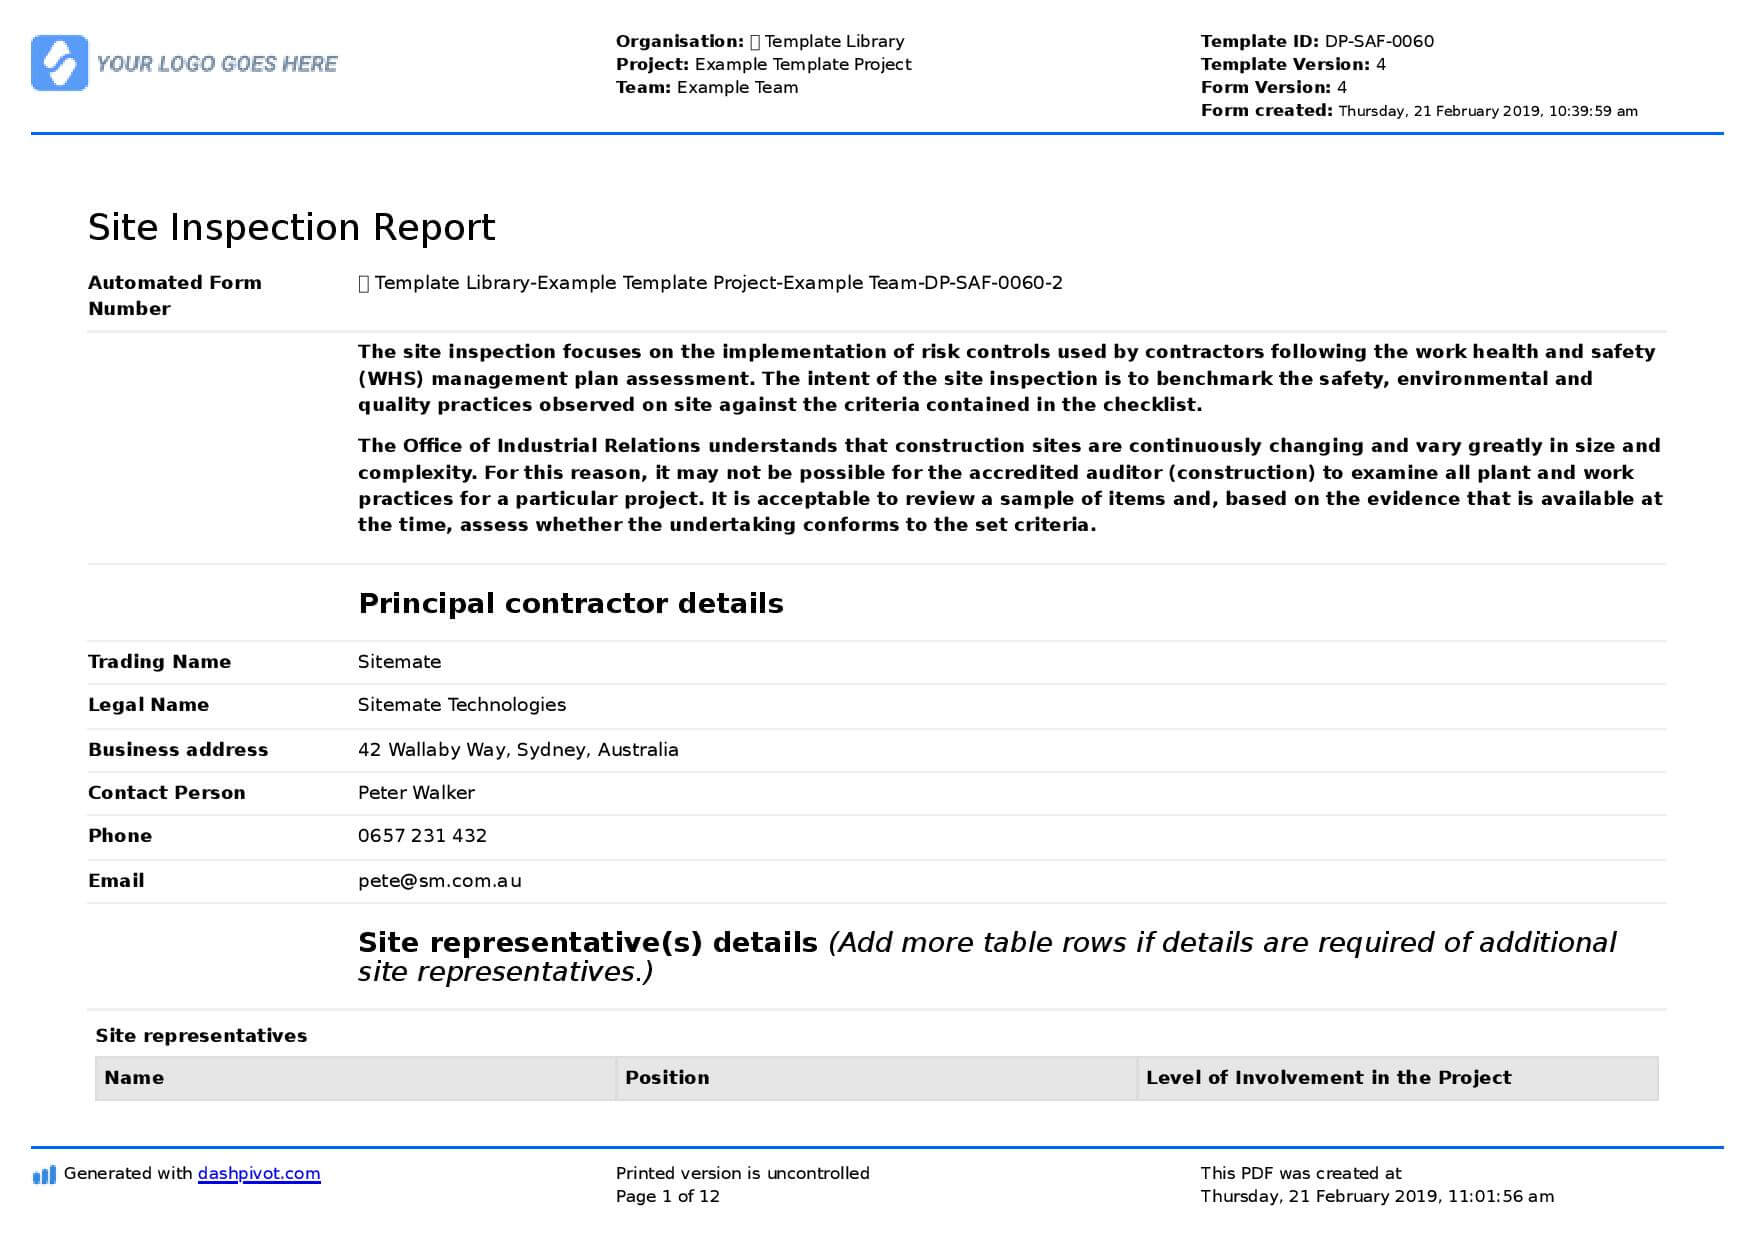 Site Inspection Report: Free Template, Sample And A Proven Within Report Requirements Template